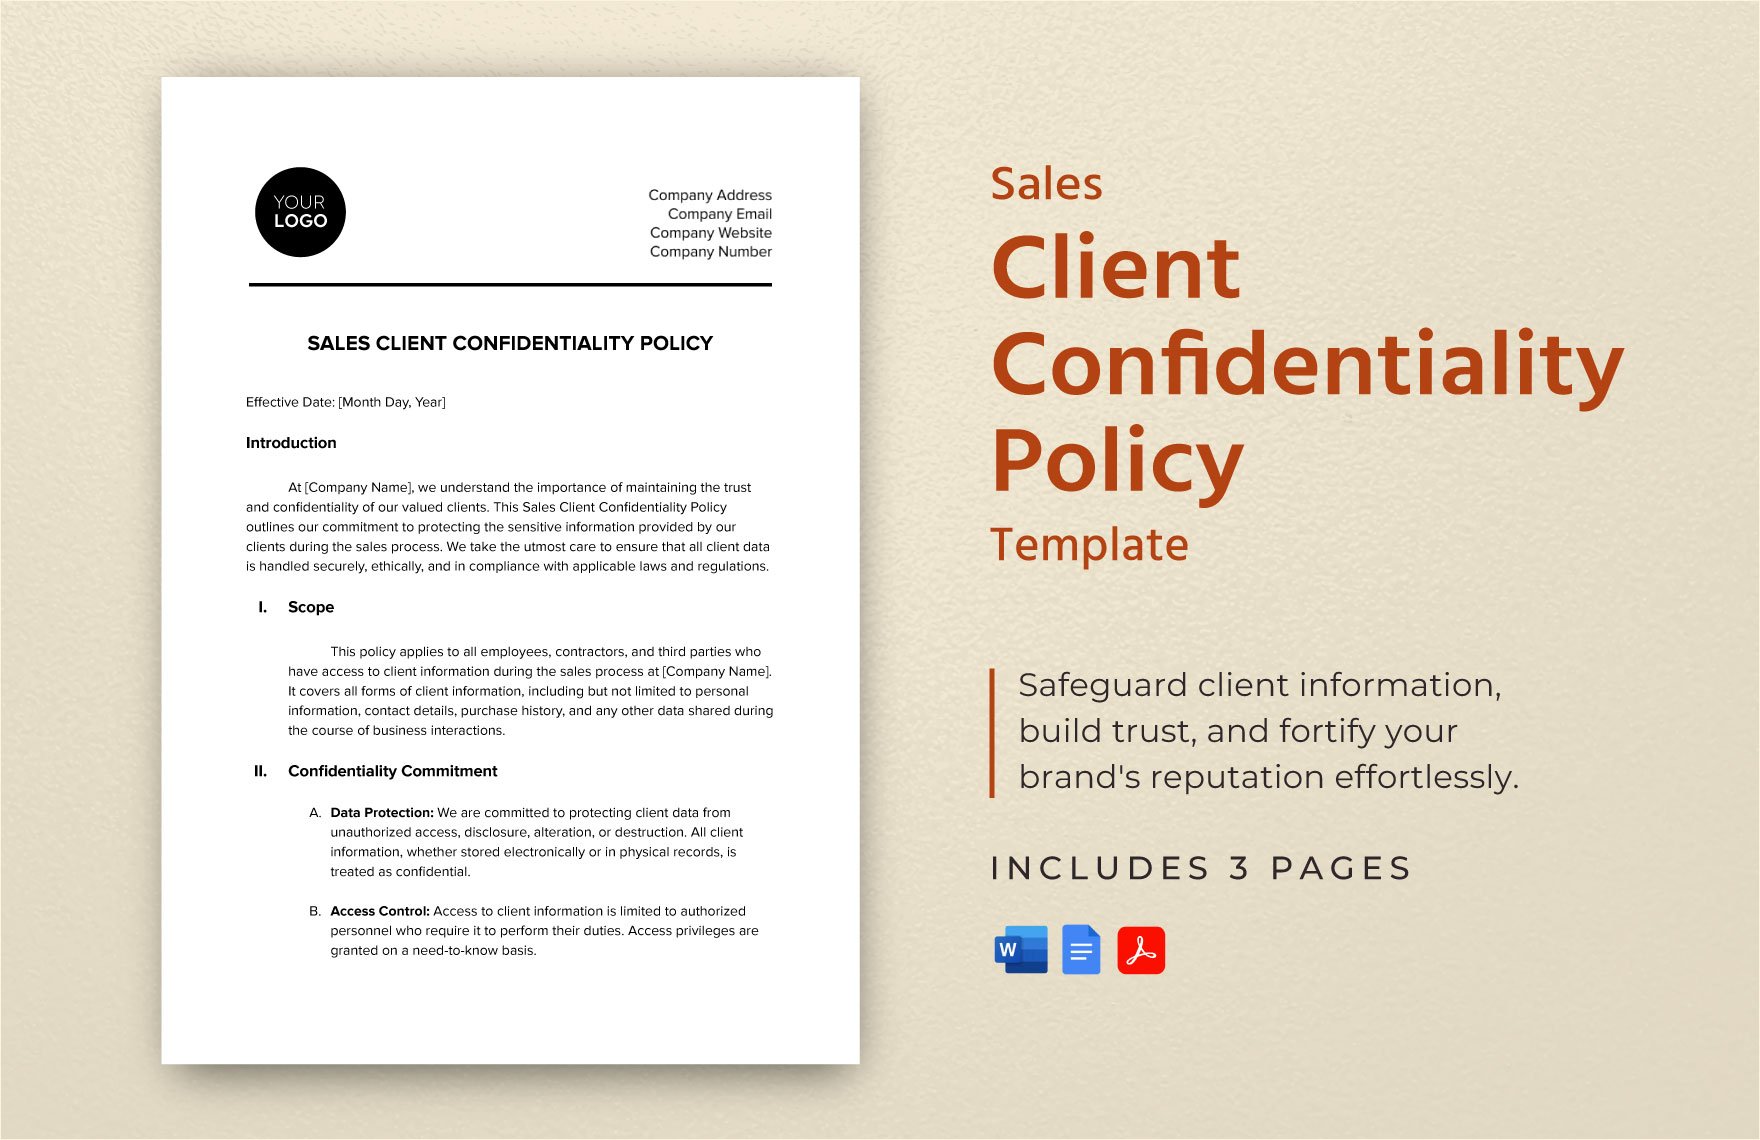 Sales Client Confidentiality Policy Template in Word, Google Docs, PDF